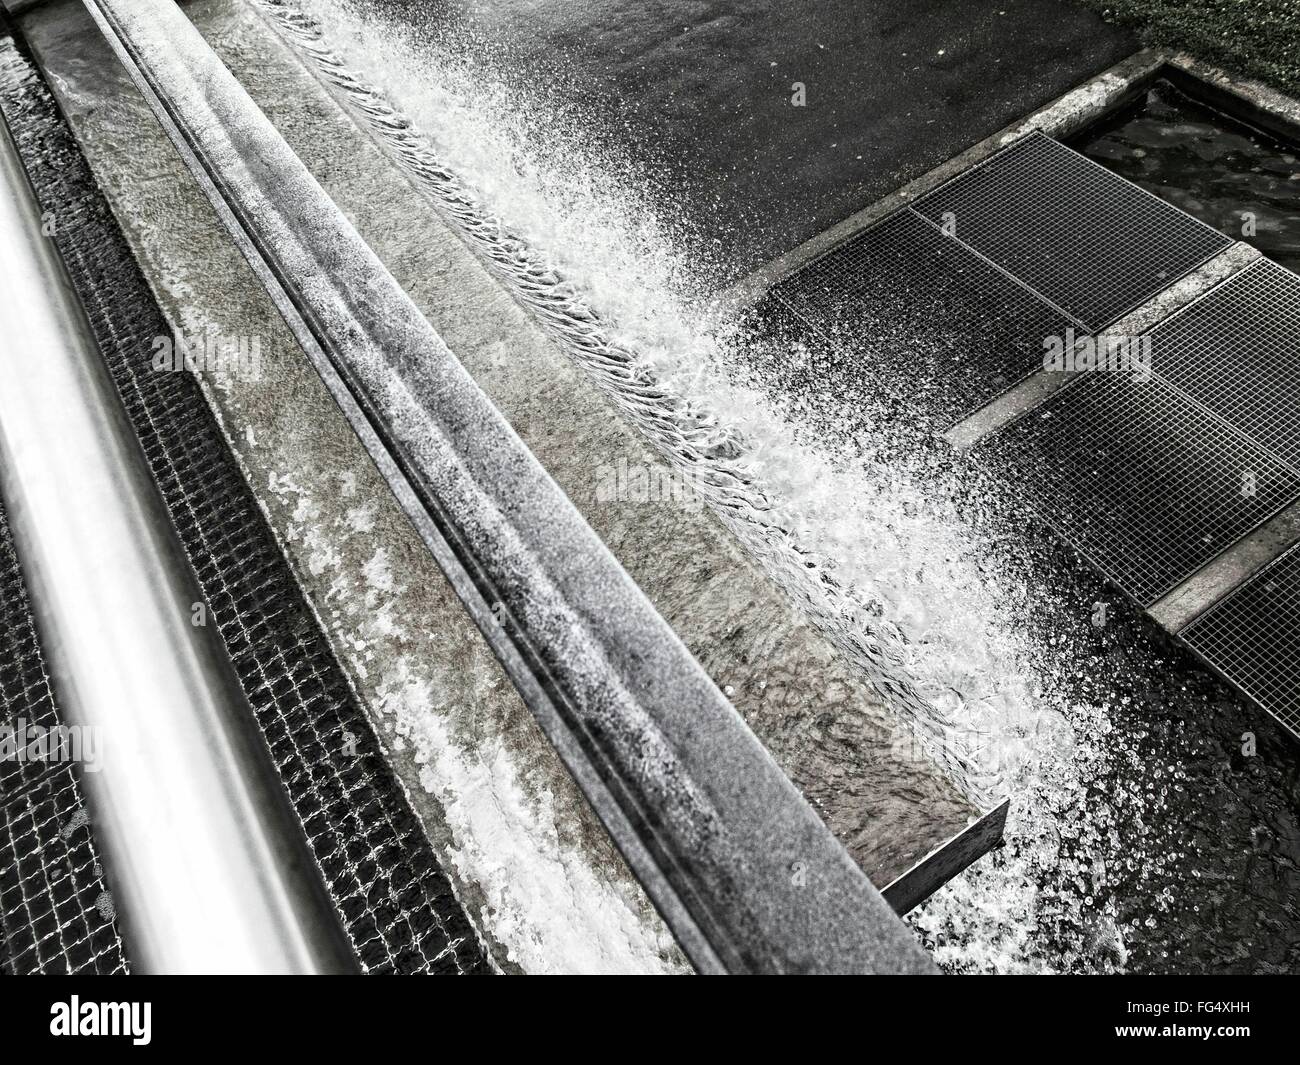 High Angle View Of Frozen Drainage By Sidewalk Stock Photo